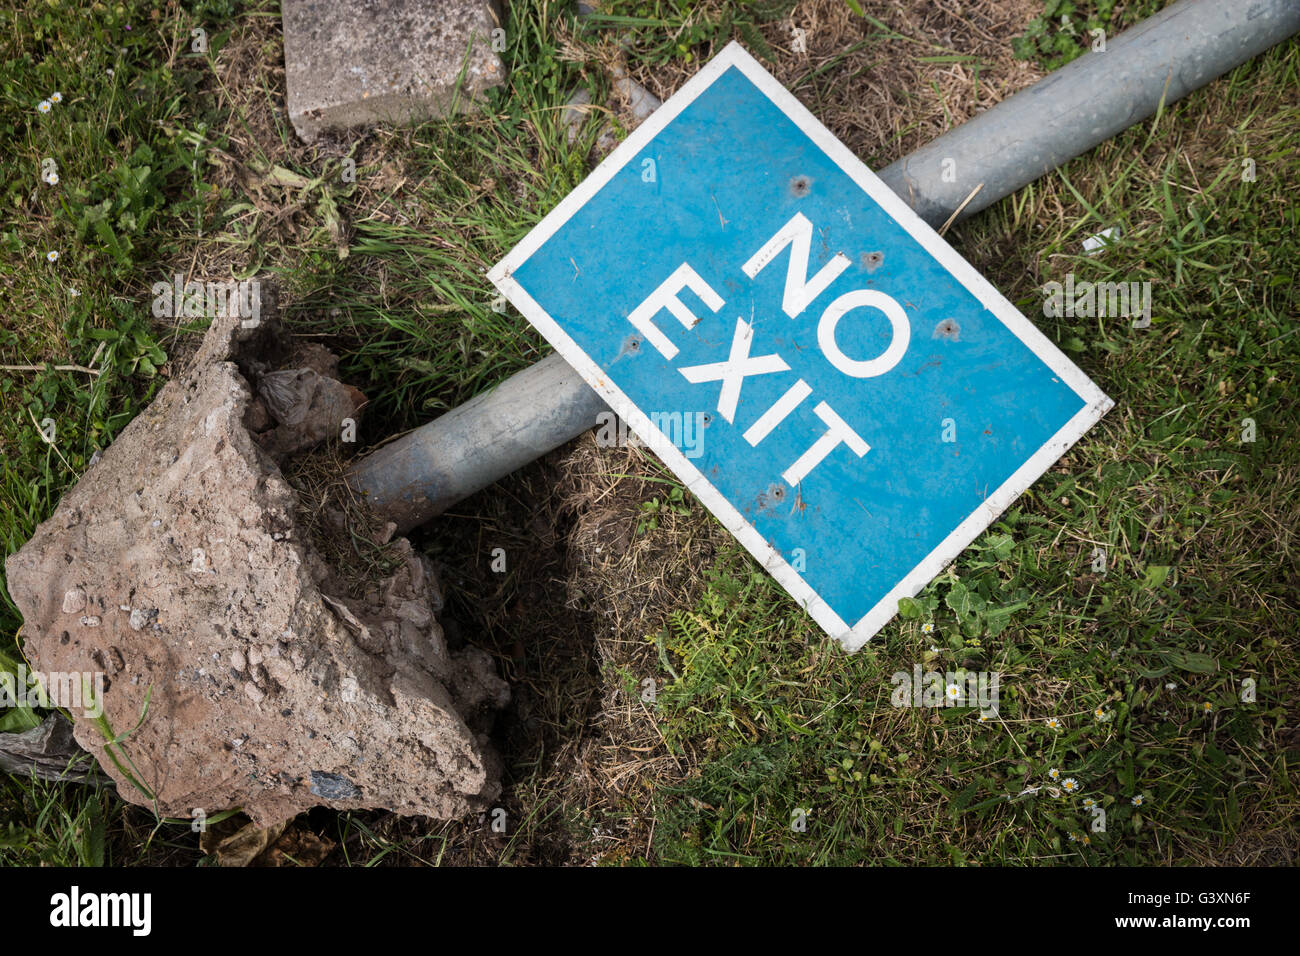 A knocked over 'No exit' sign lying on an uprooted sign pole. Stock Photo